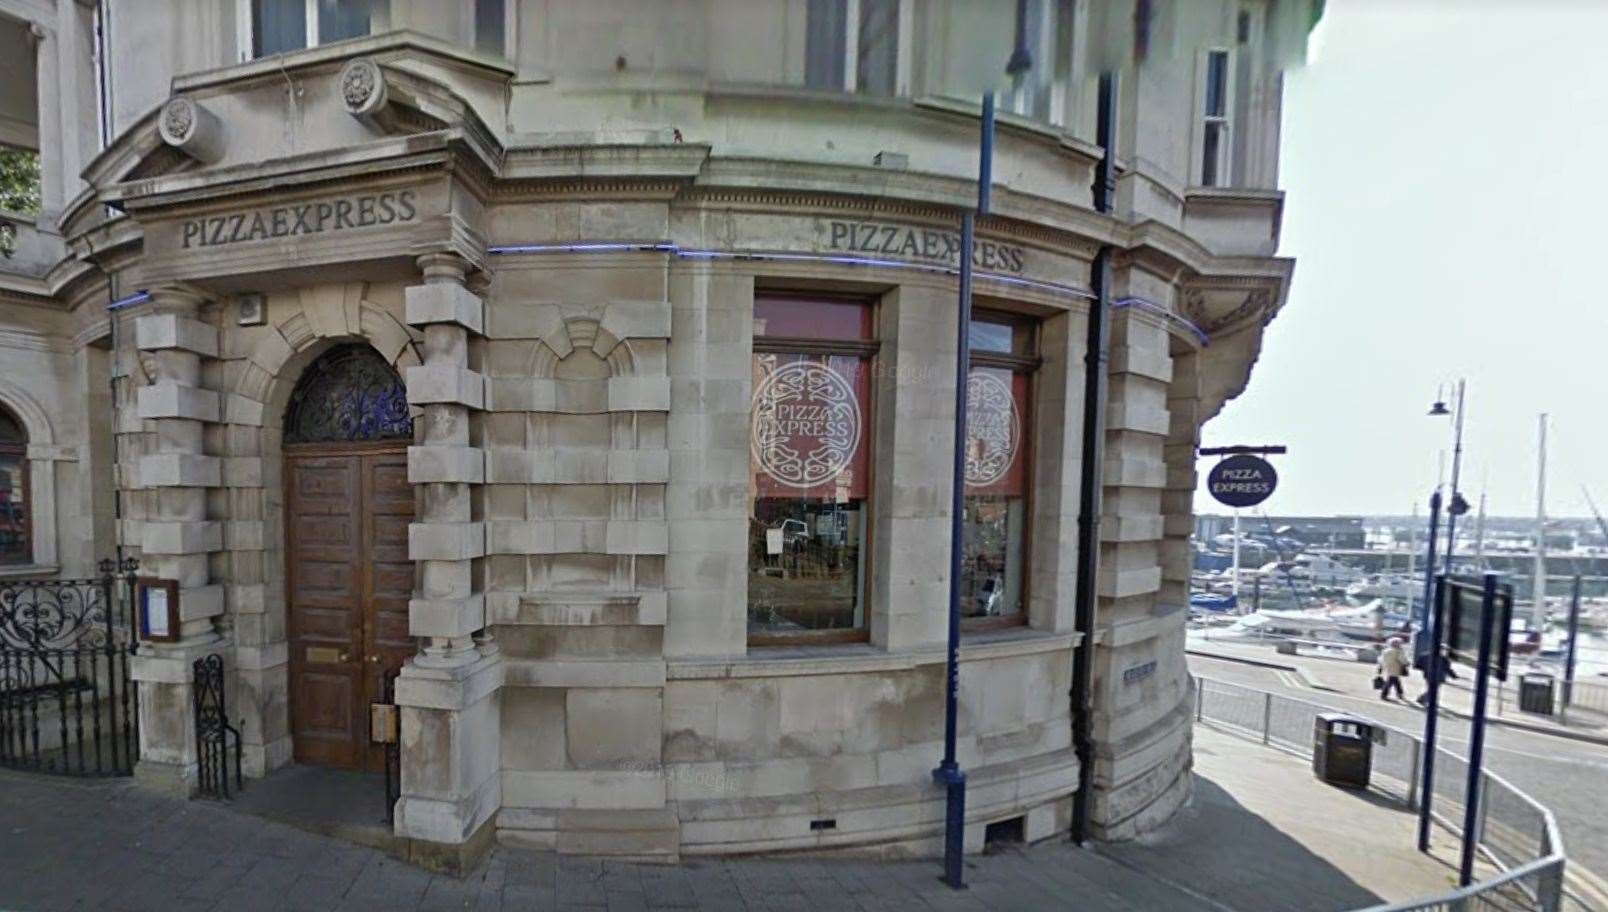 The new burger joint is in a 128-year-old building overlooking Ramsgate harbour. Picture: Google